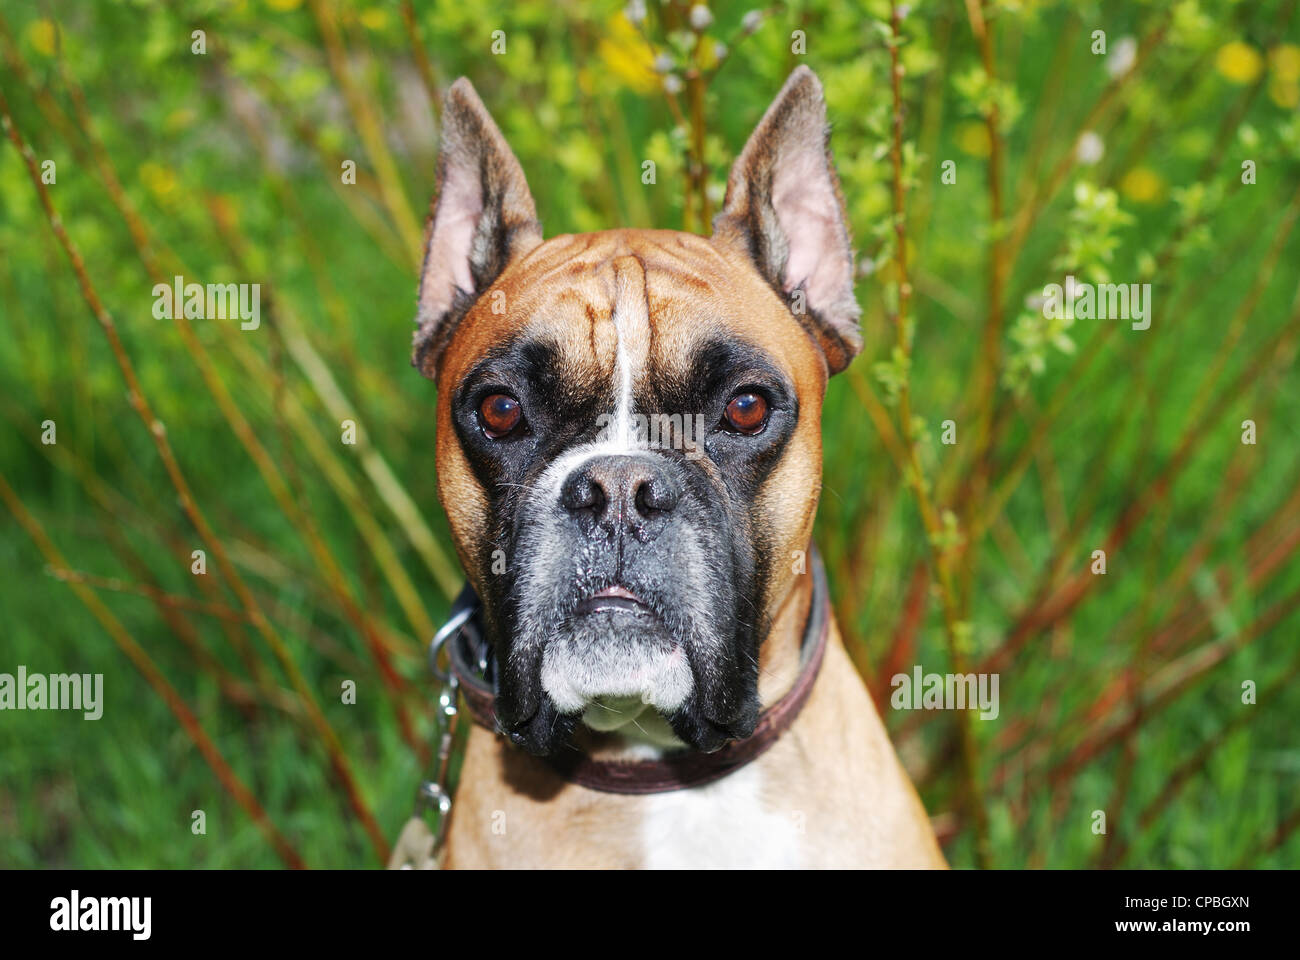 dog look at camera against green background Stock Photo